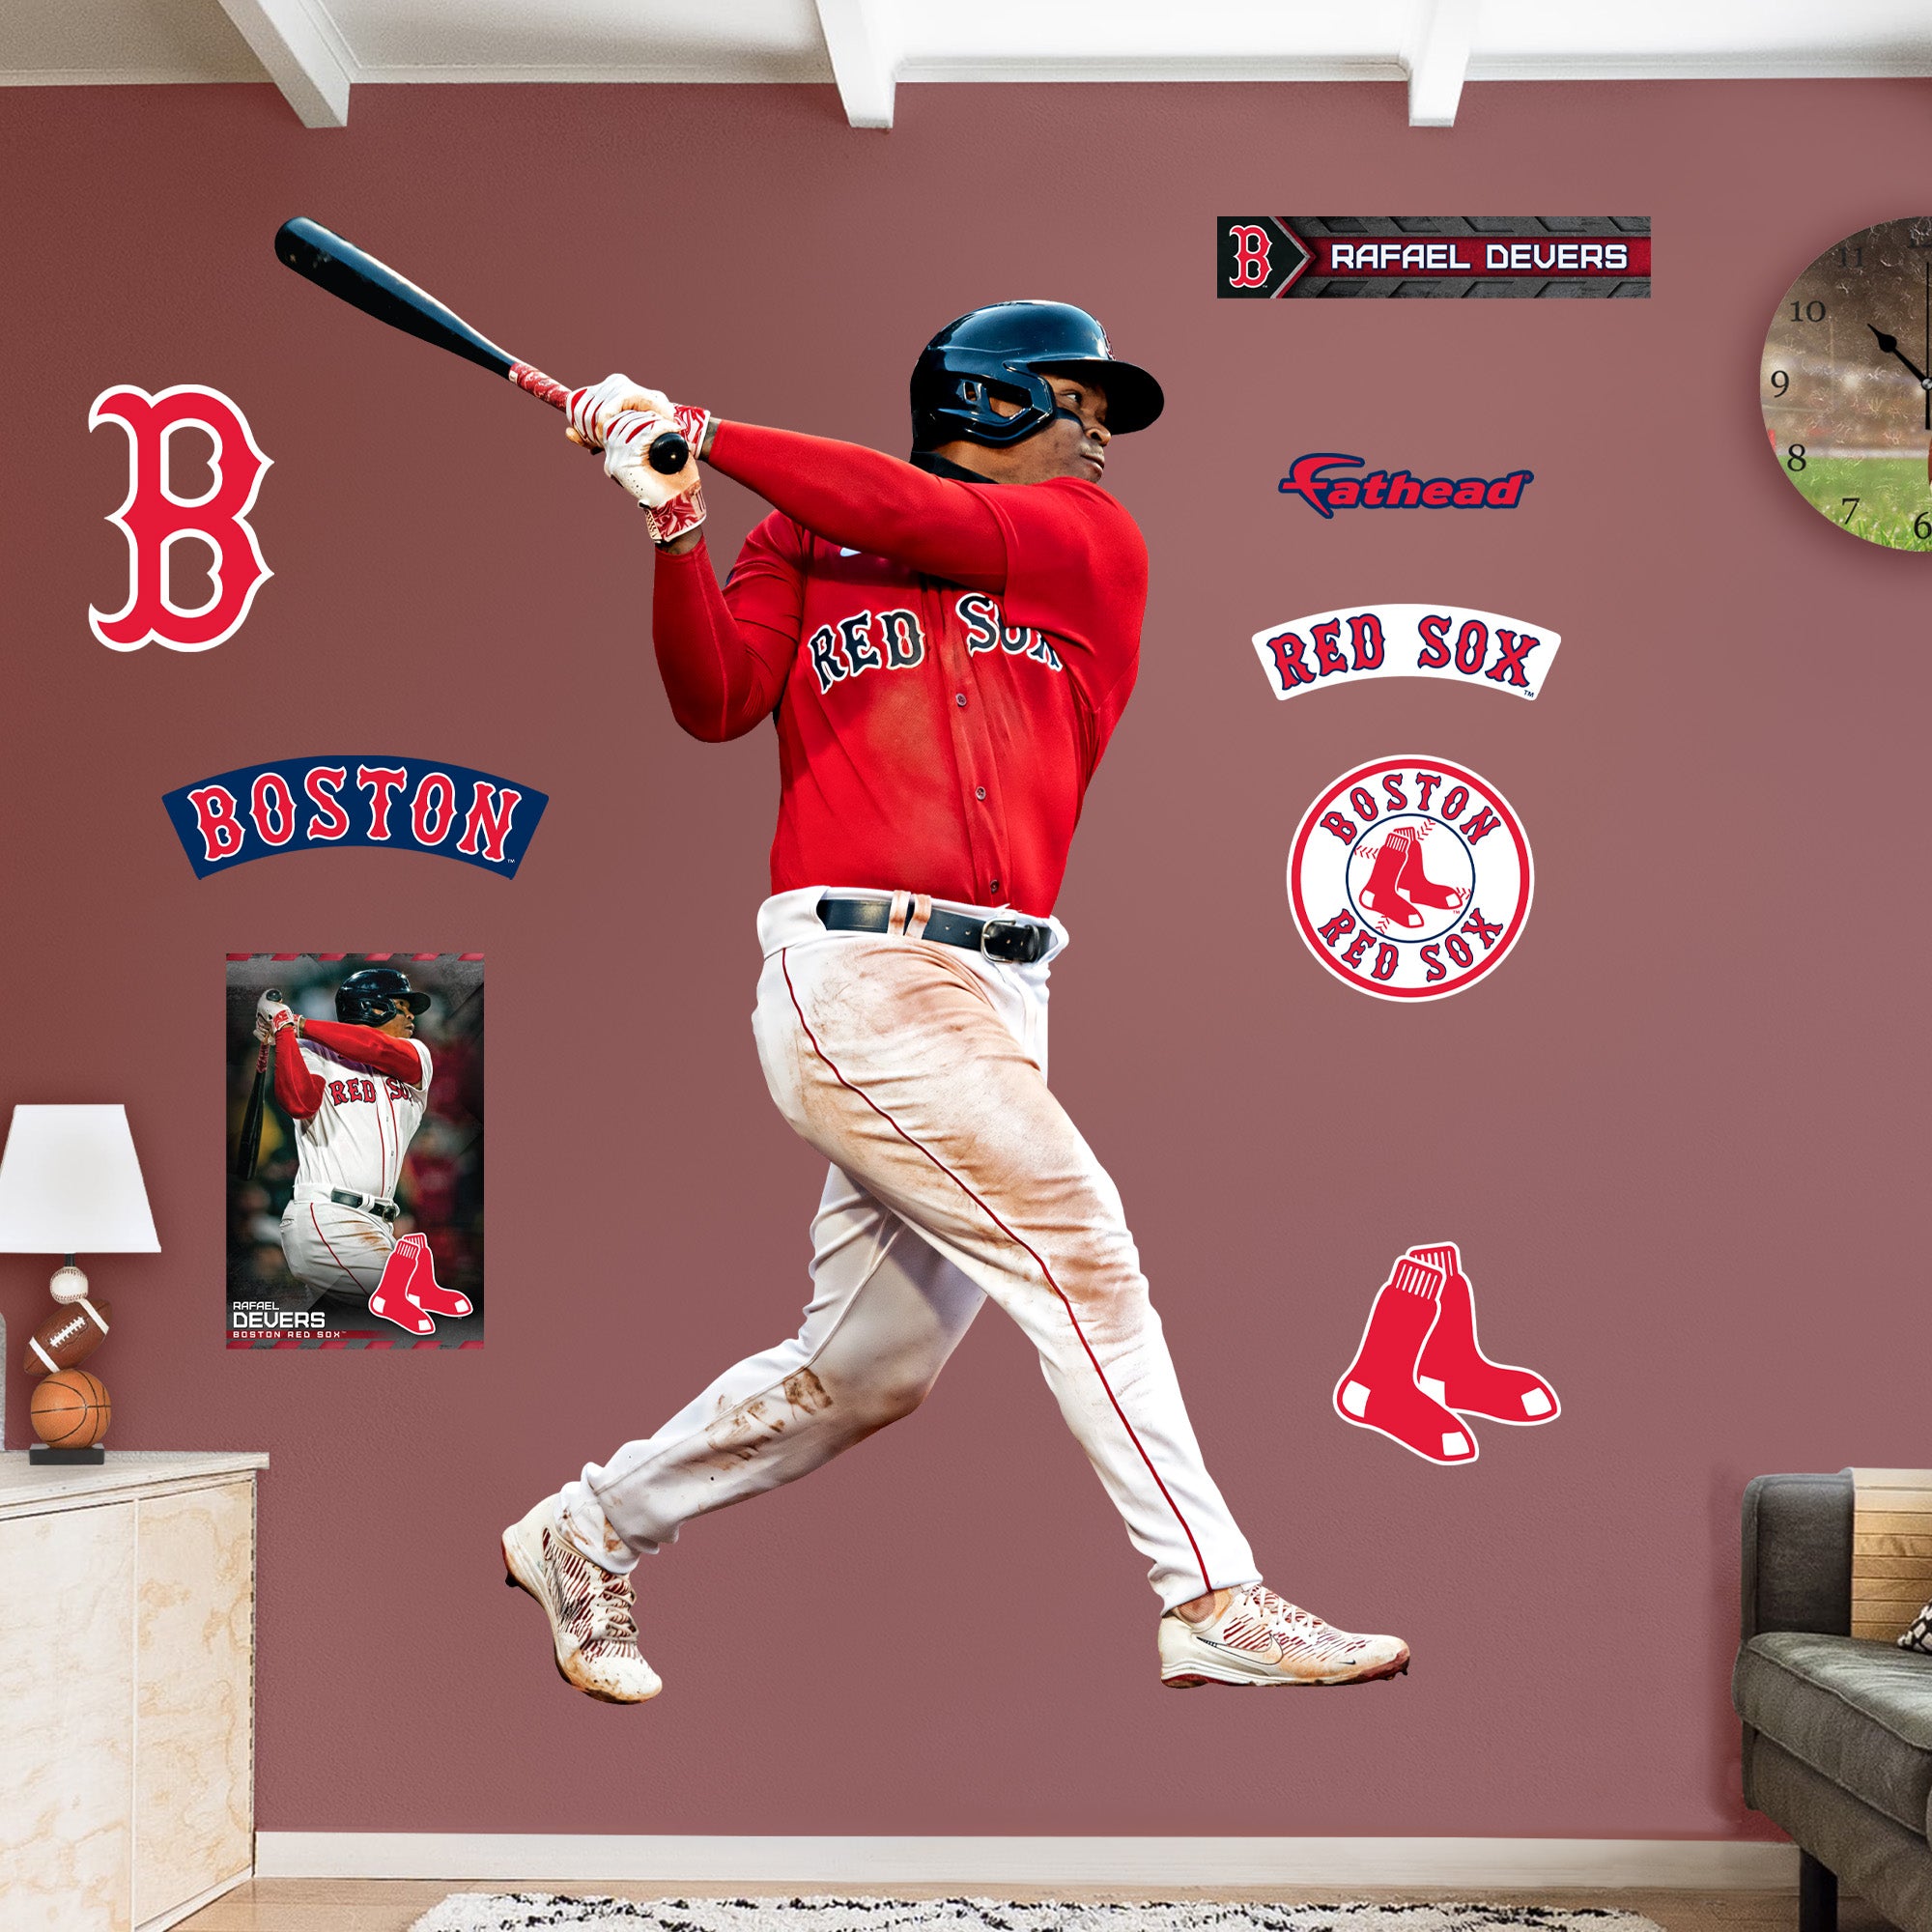 Boston Red Sox Stickers for Sale